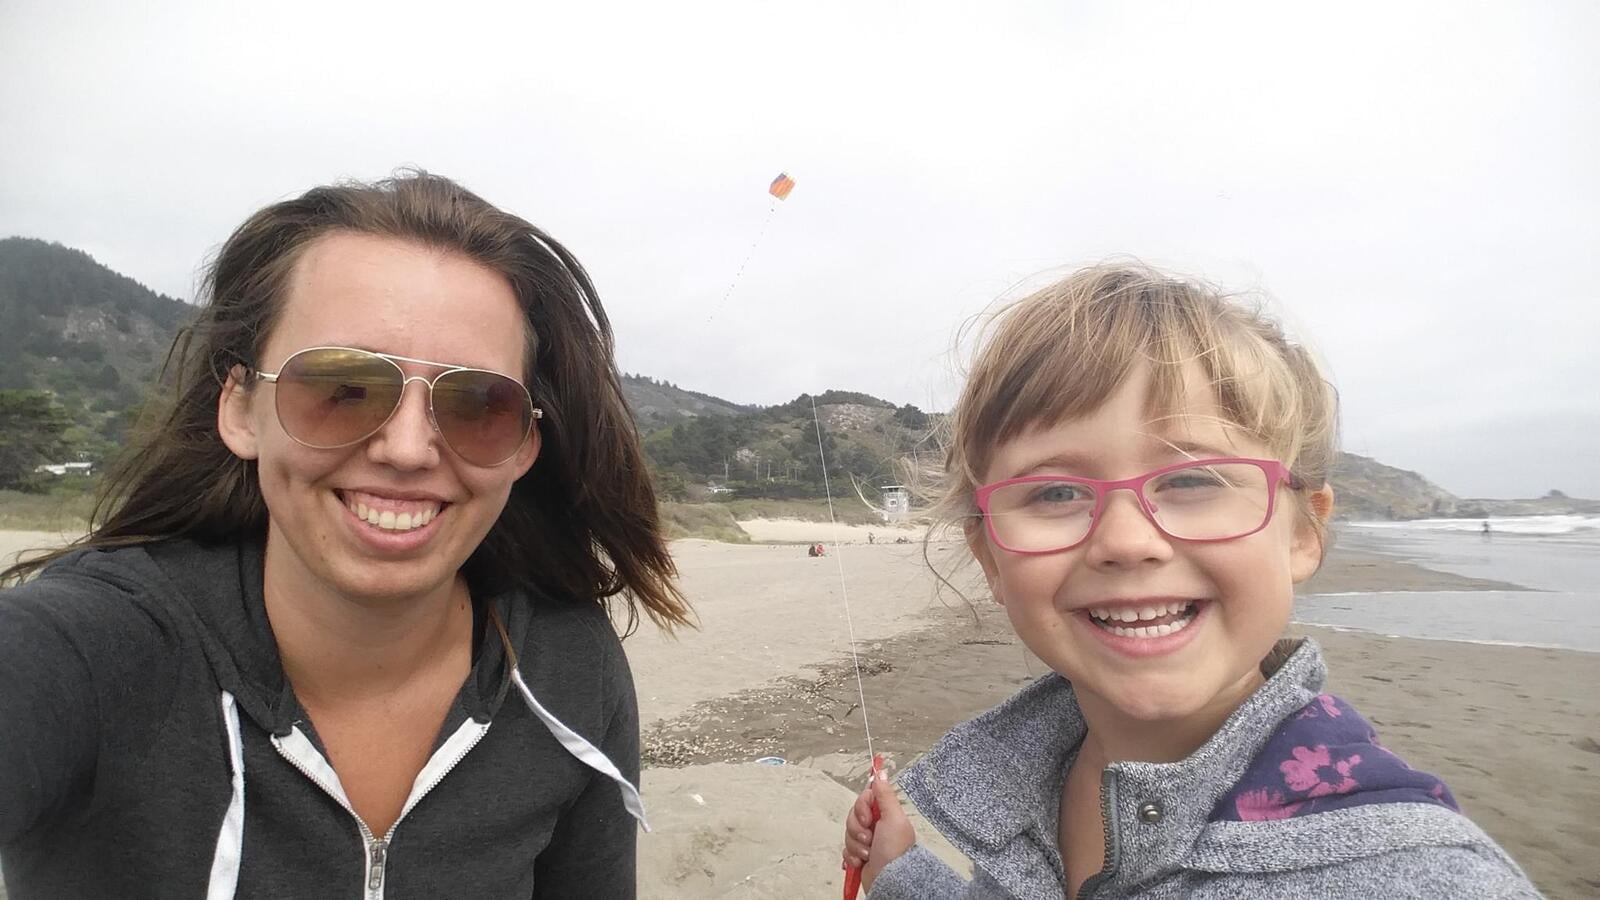 A women wearing glasses in a black hoody next to a little girl in a grey jacket holding a string connected to a flying kite behind them in the sky.